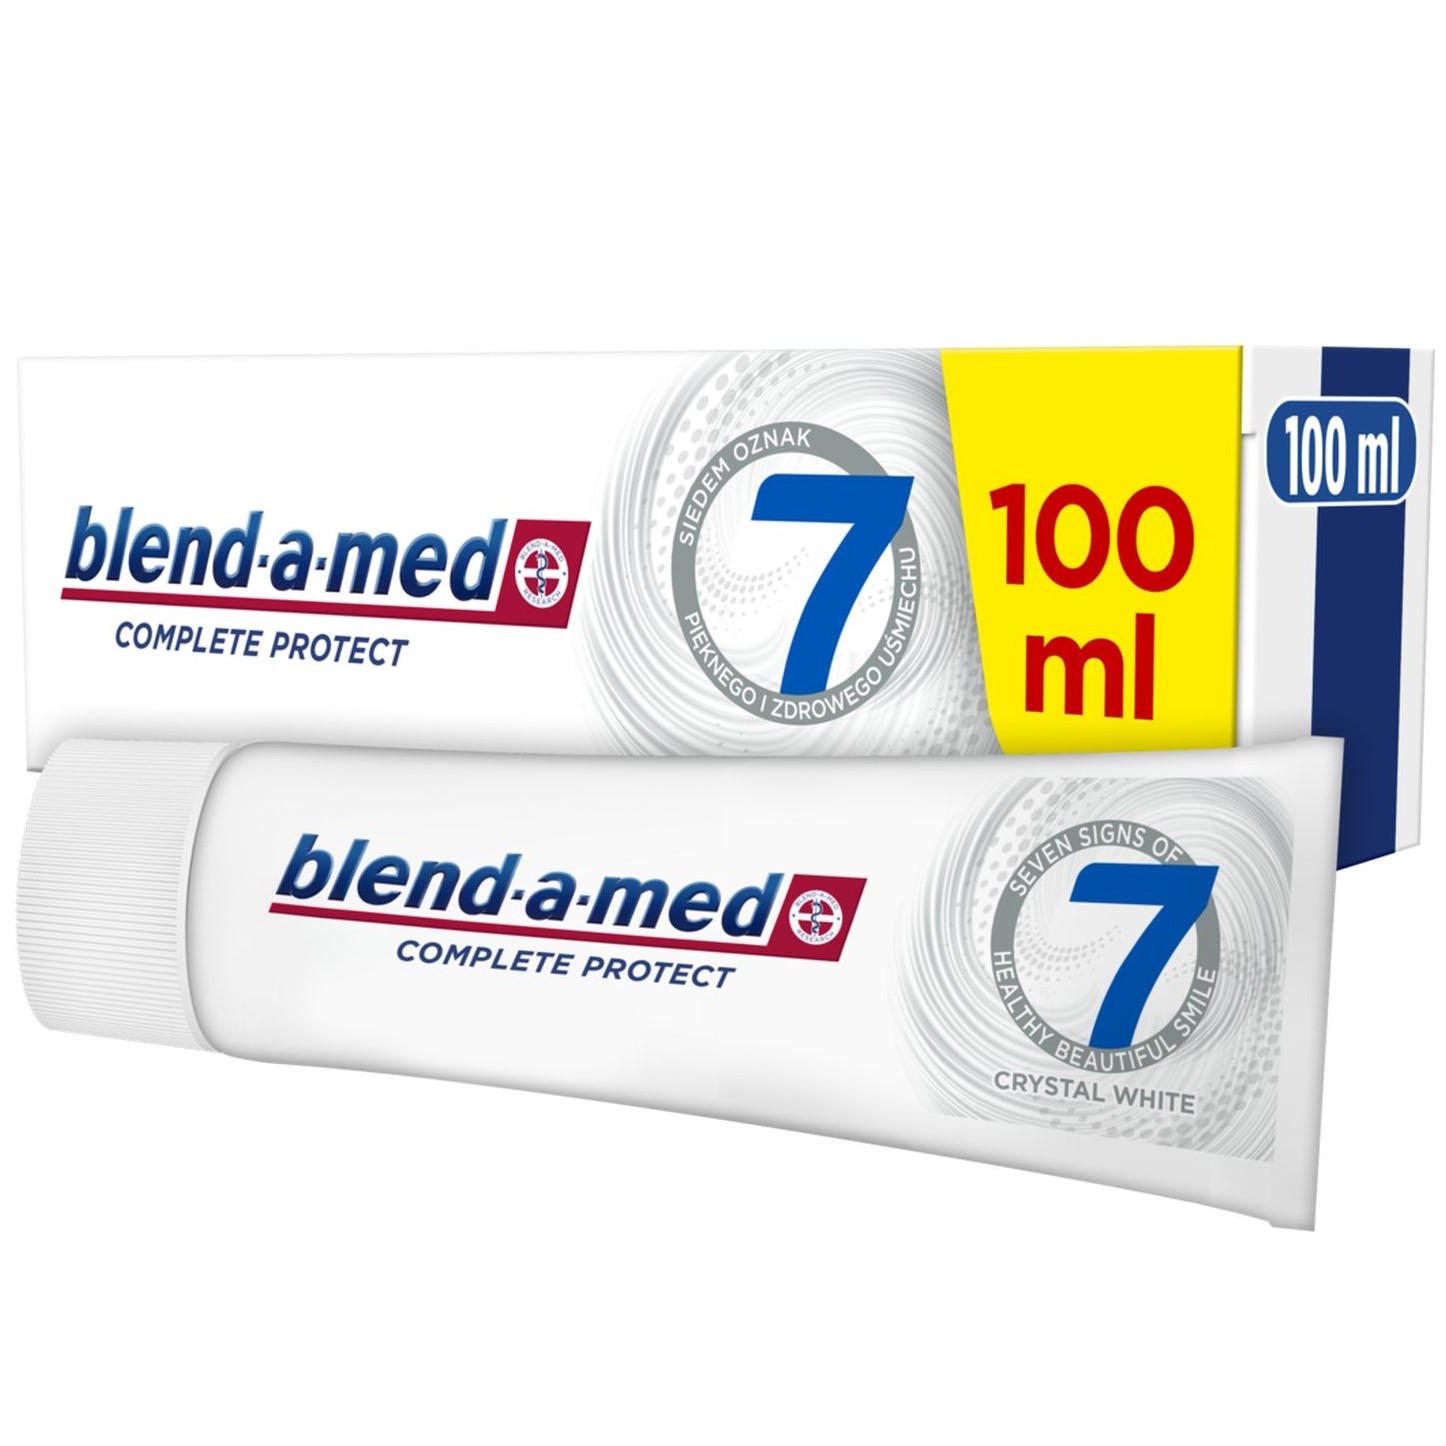 Зубна паста Blend-a-med Complete Protect 7 Кришталева білизна 100 мл - фото 1